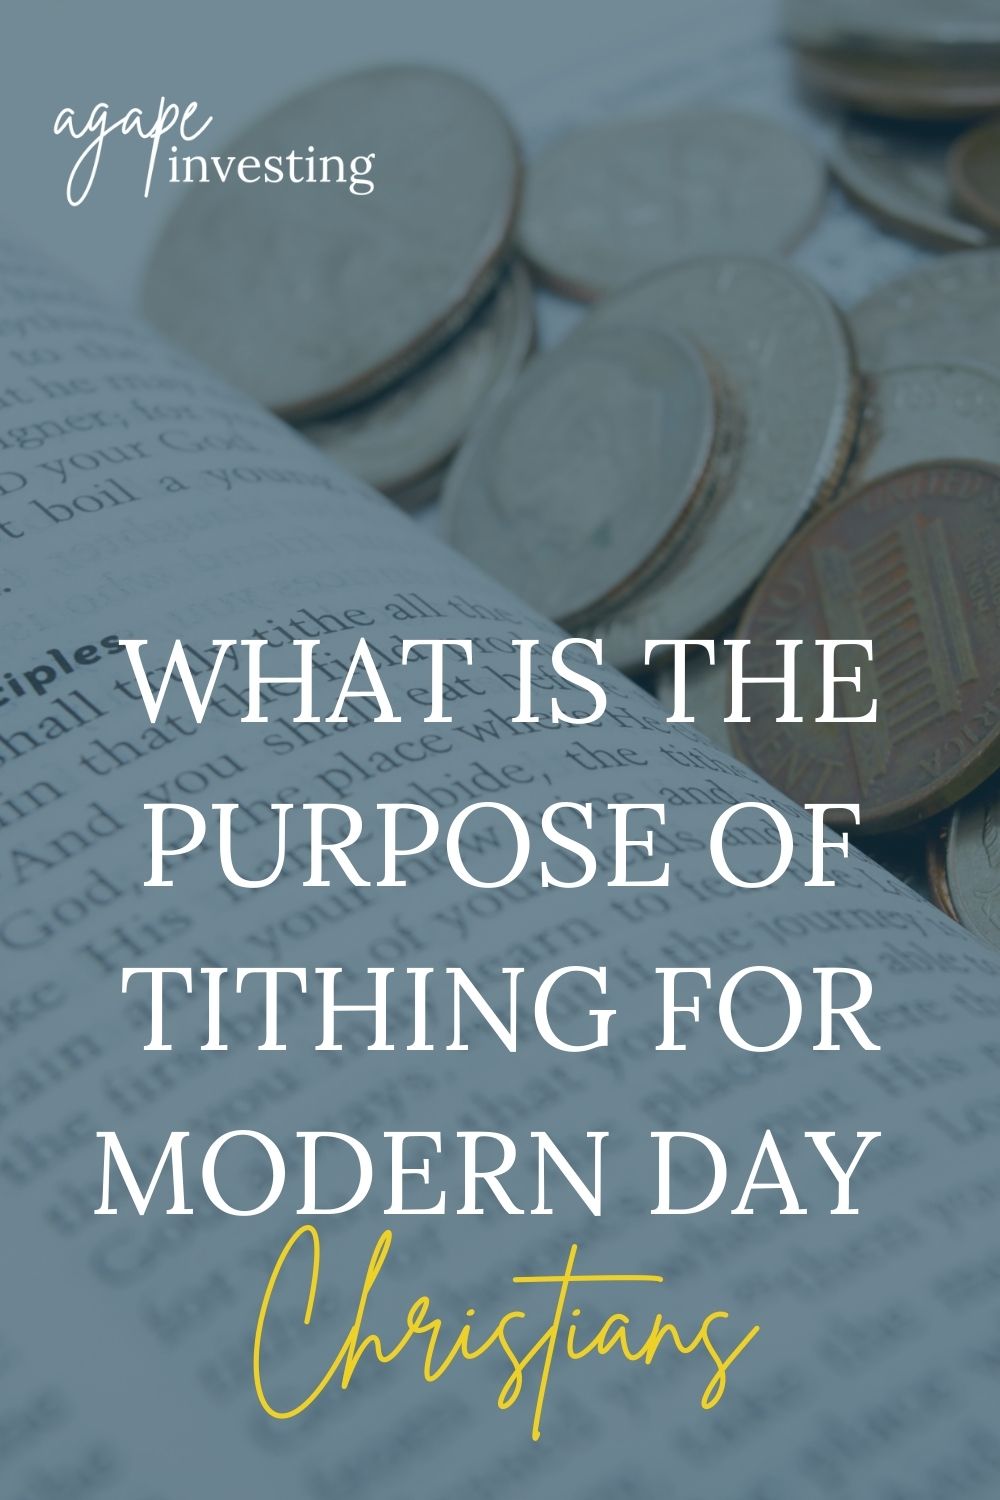 What is the purpose of tithing for modern day Christians? Is tithing still important for Christians today? And if so, how do we tithe biblically?